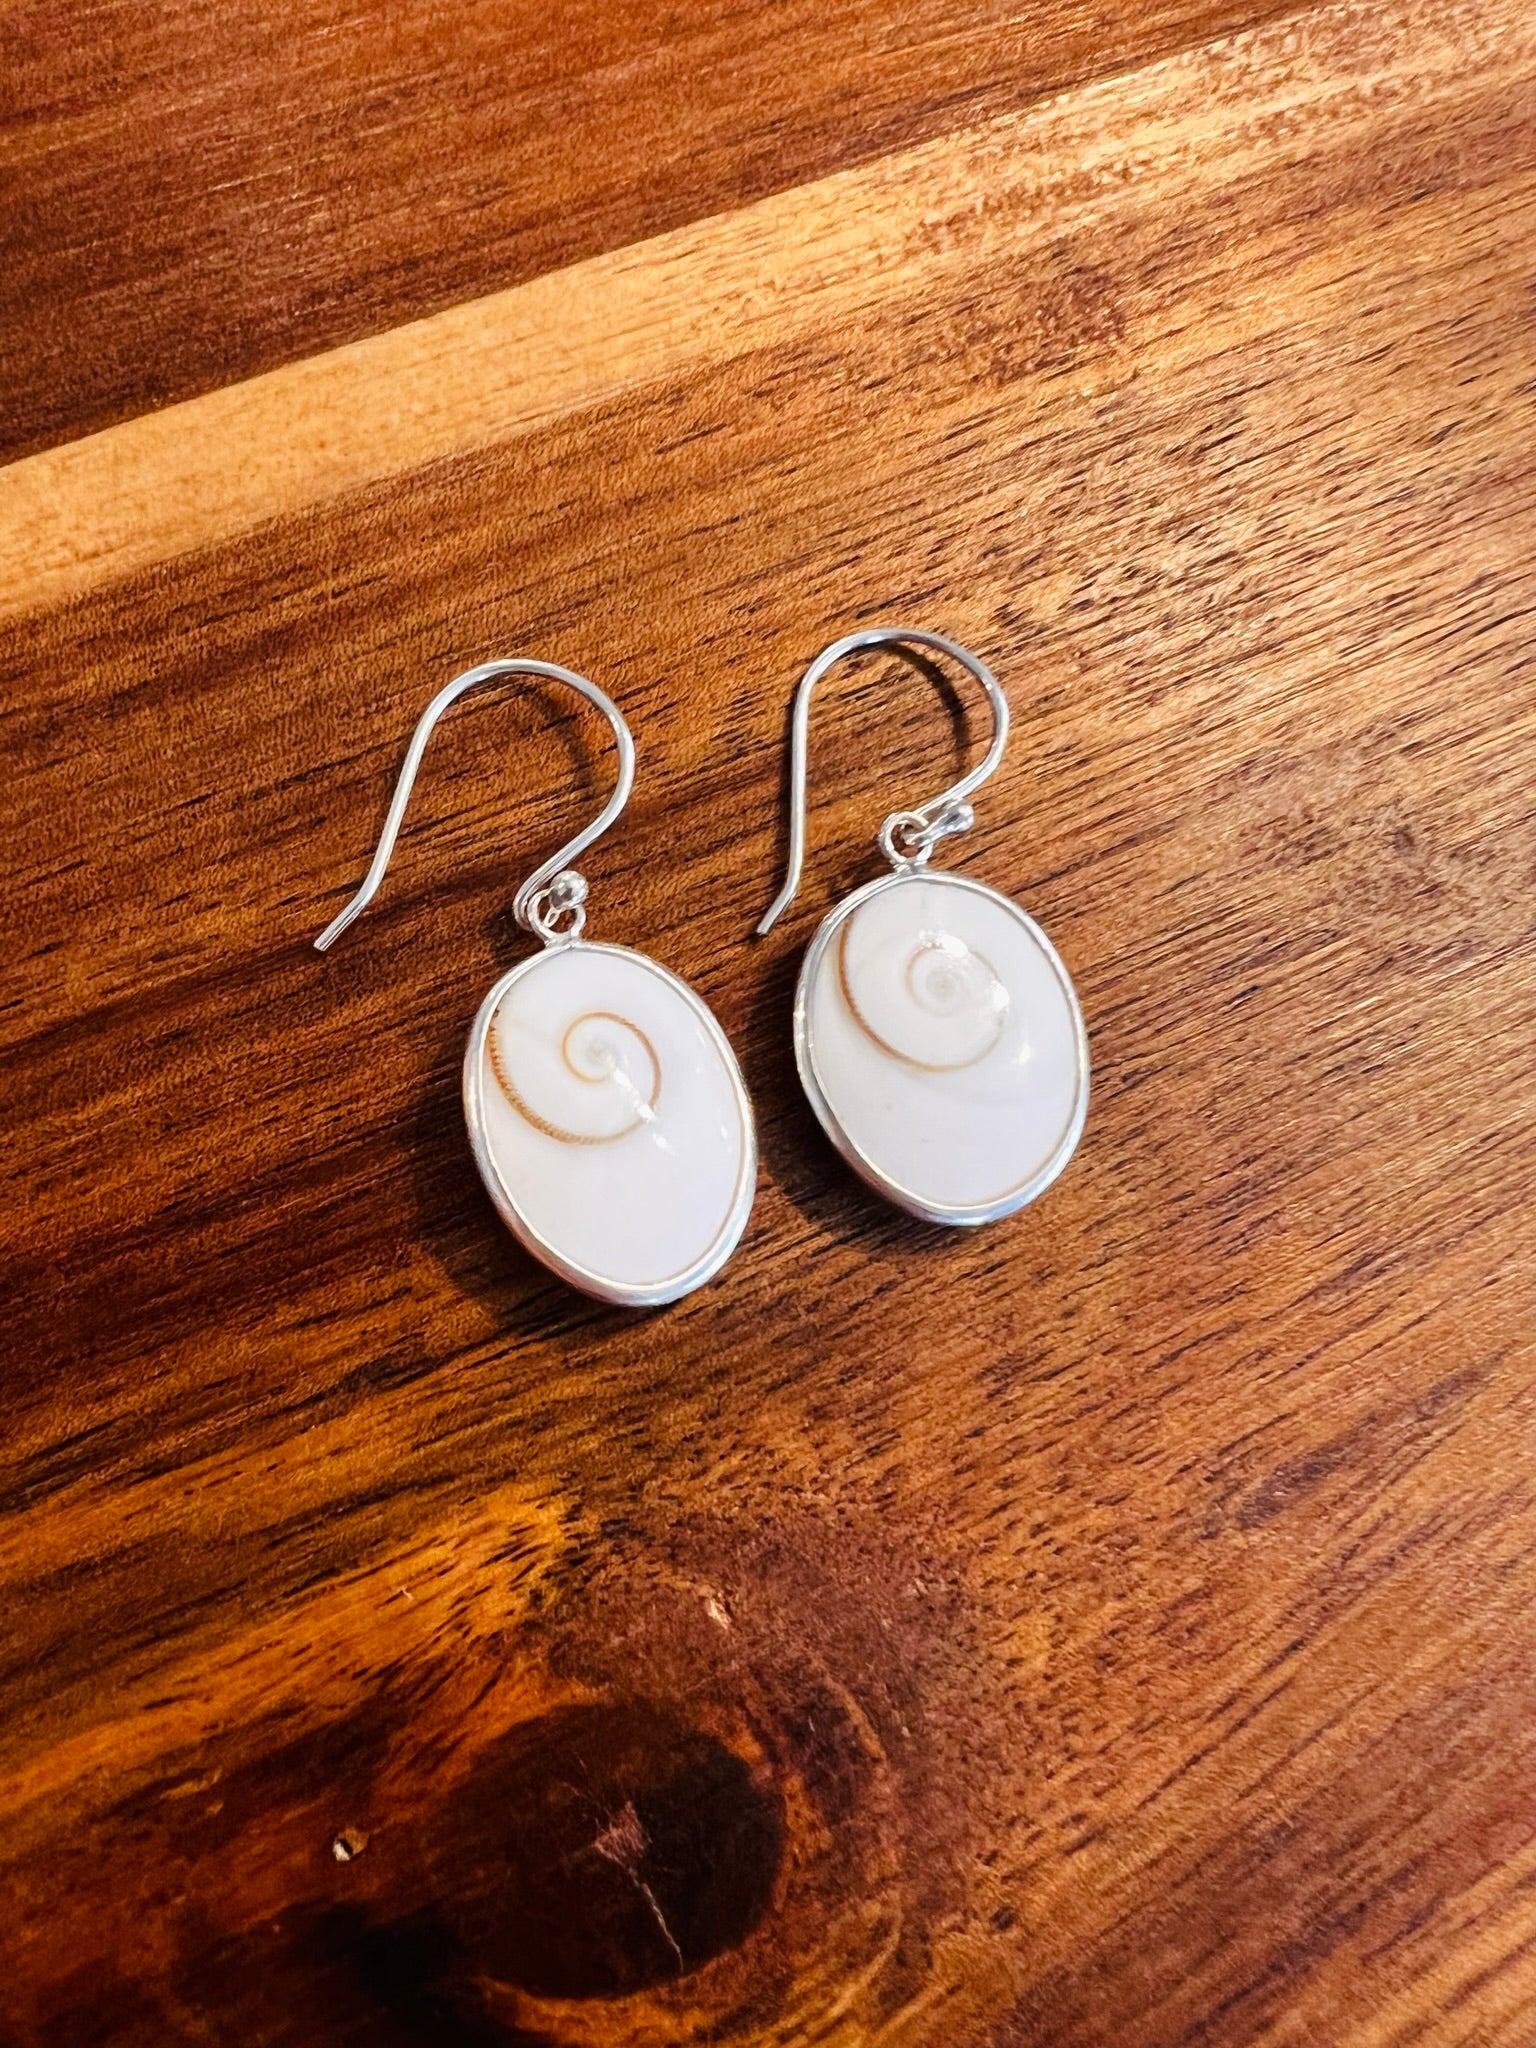 Oval Mother of Pearl Earrings